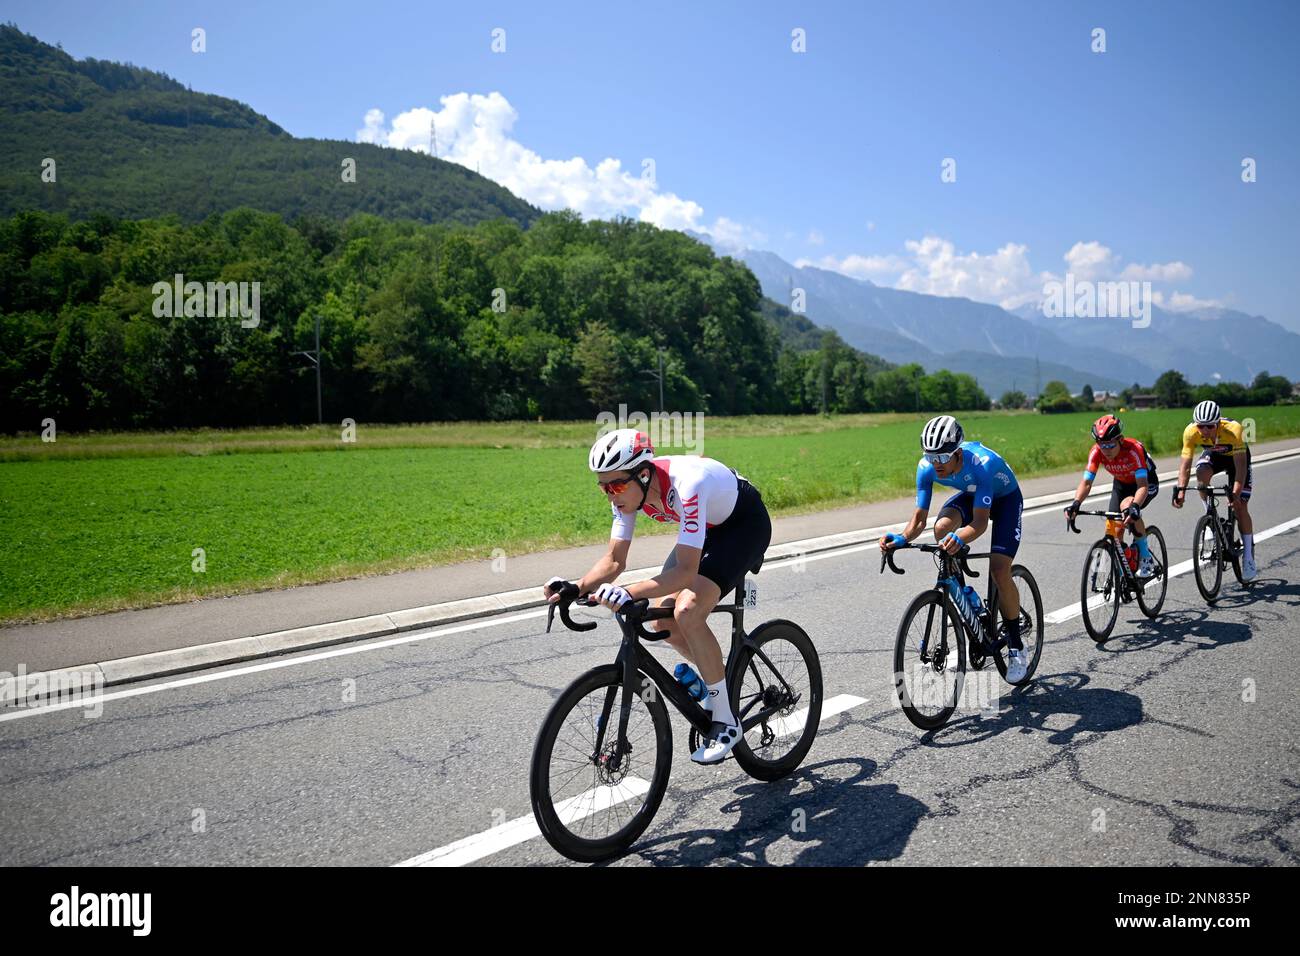 Claudio Imhof from Switzerland of Swiss Cycling, Sergio Samitier from Spain  of Movistar Team, Hermann Pernsteiner from Austria of Bahrain Victorious  and Mathieu van der Poel from the Netherlands of Alpecin-Fenix, from